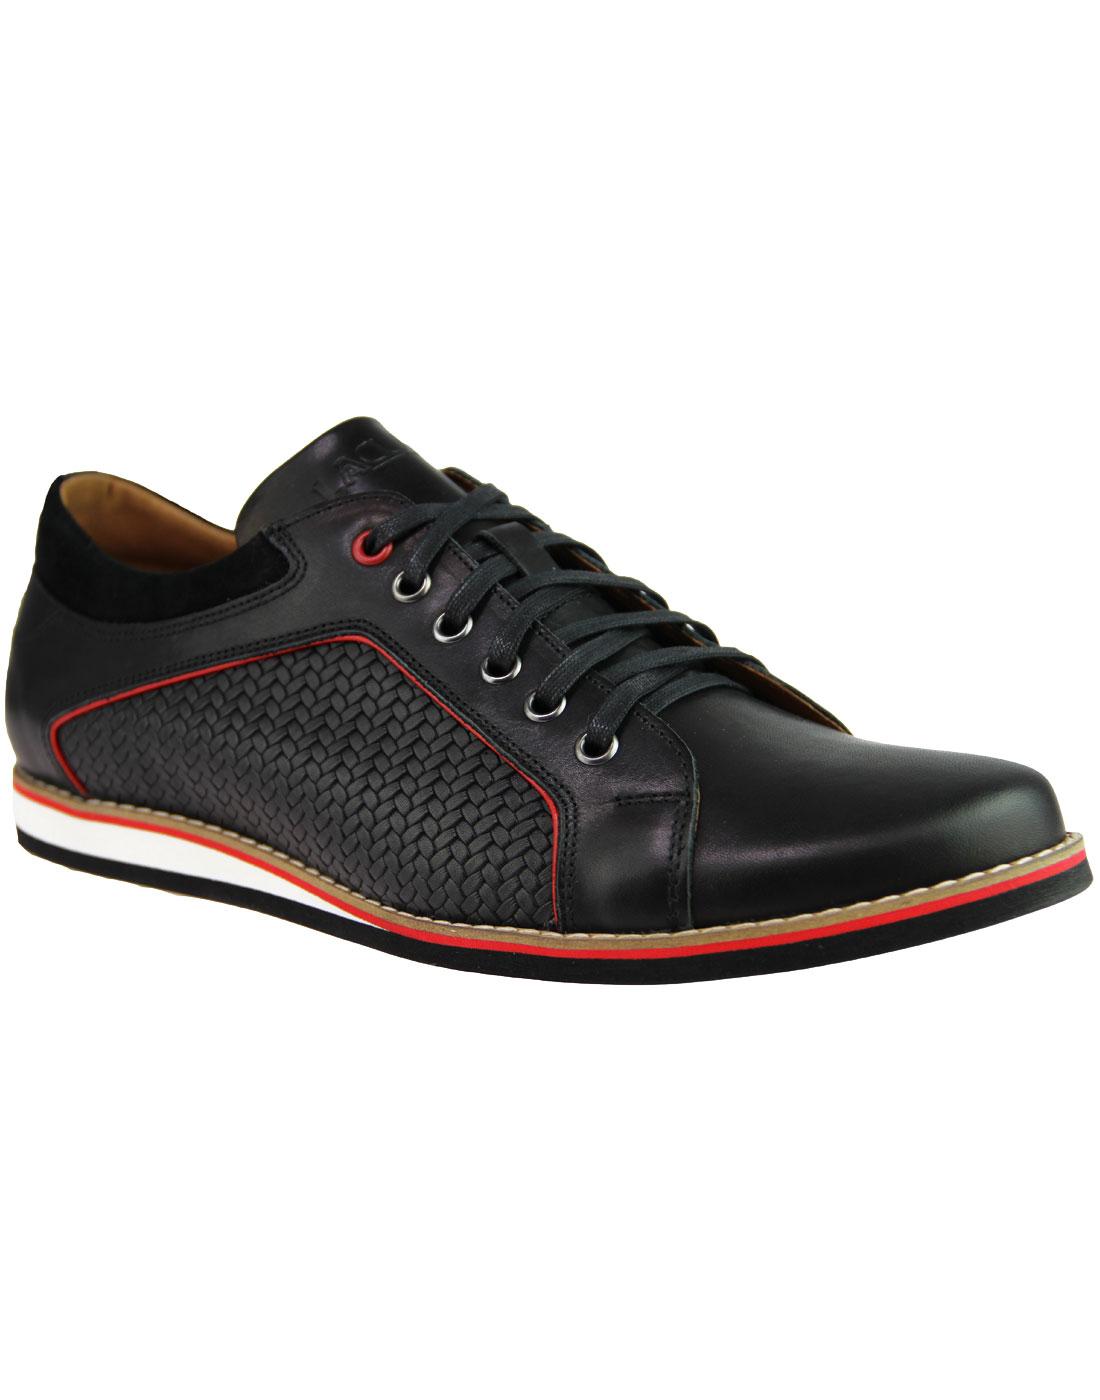 LACUZZO Northern Soul Weave Casual Trainer Shoes in Black